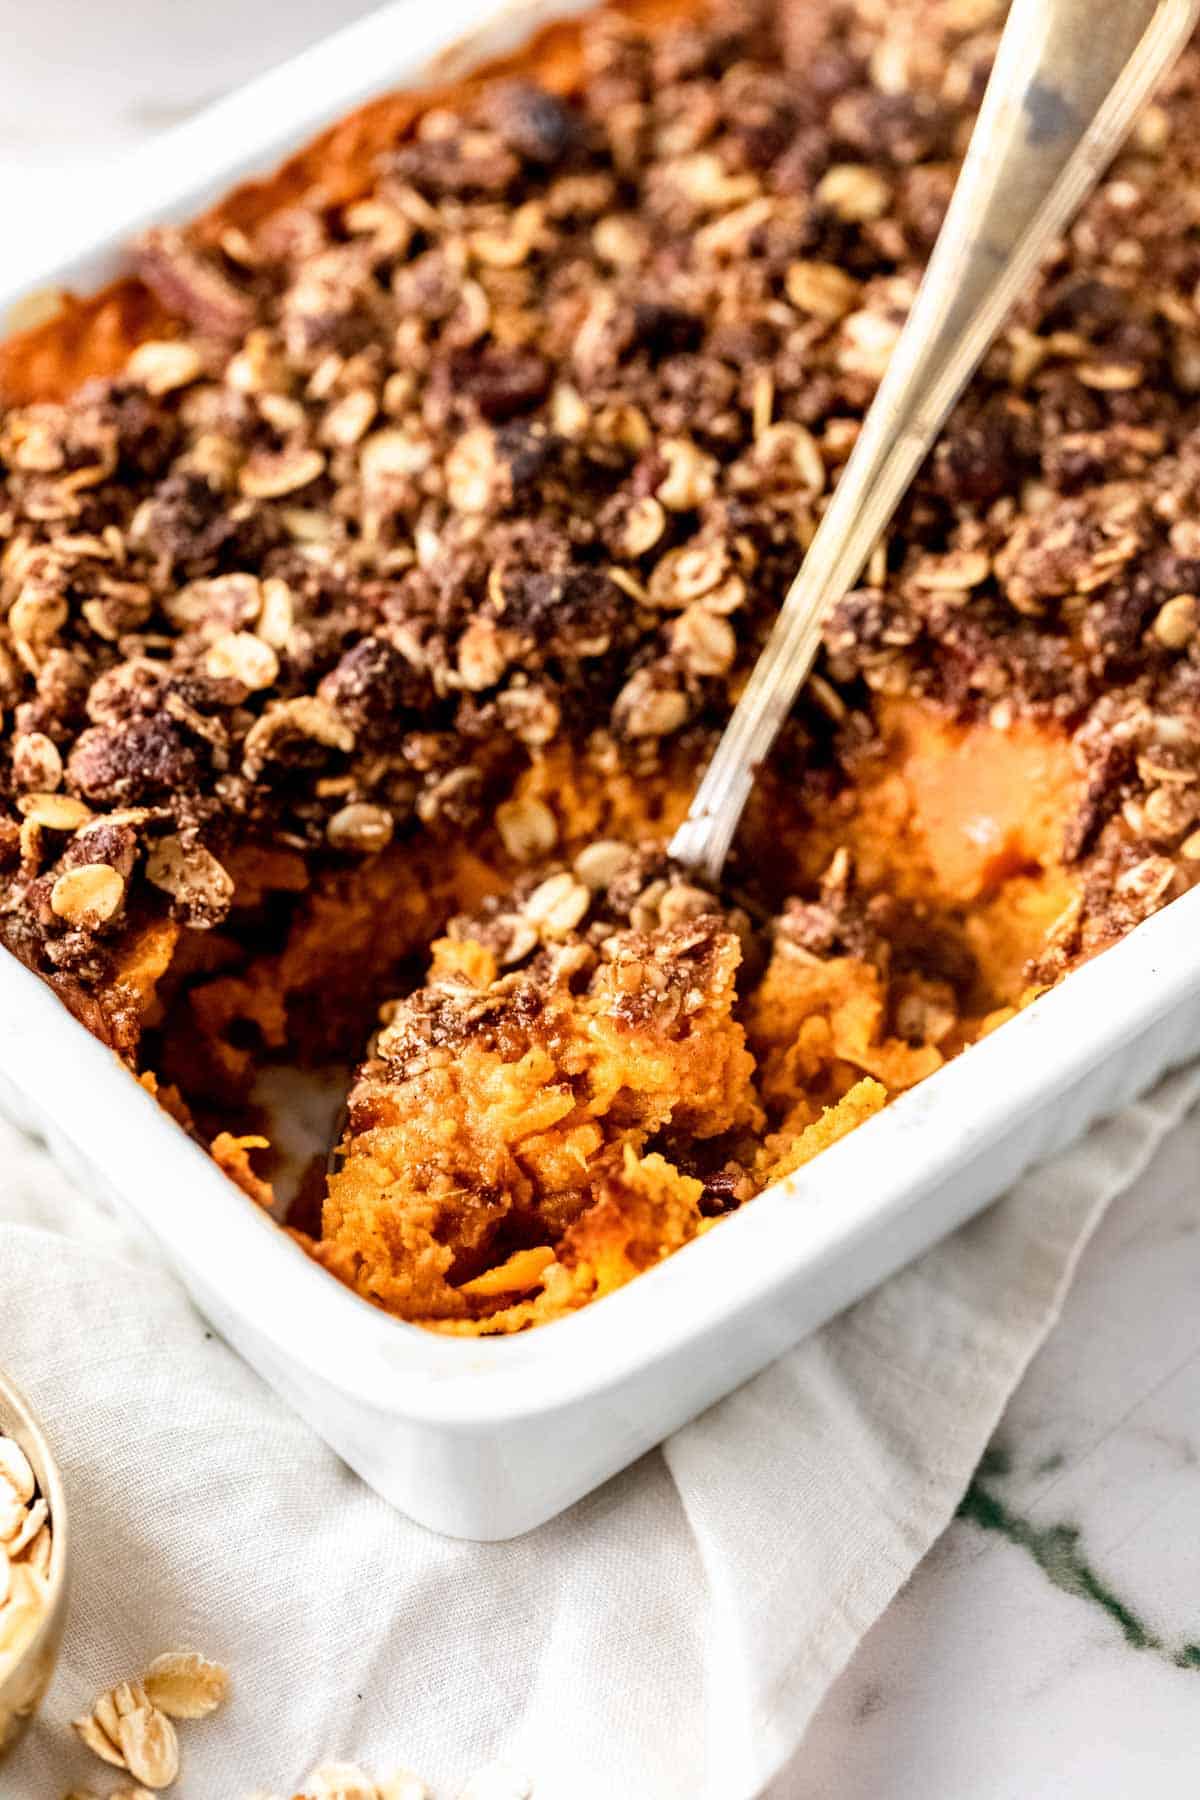 Overhead view of sweet potato casserole in a baking dish with a large serving spoon.